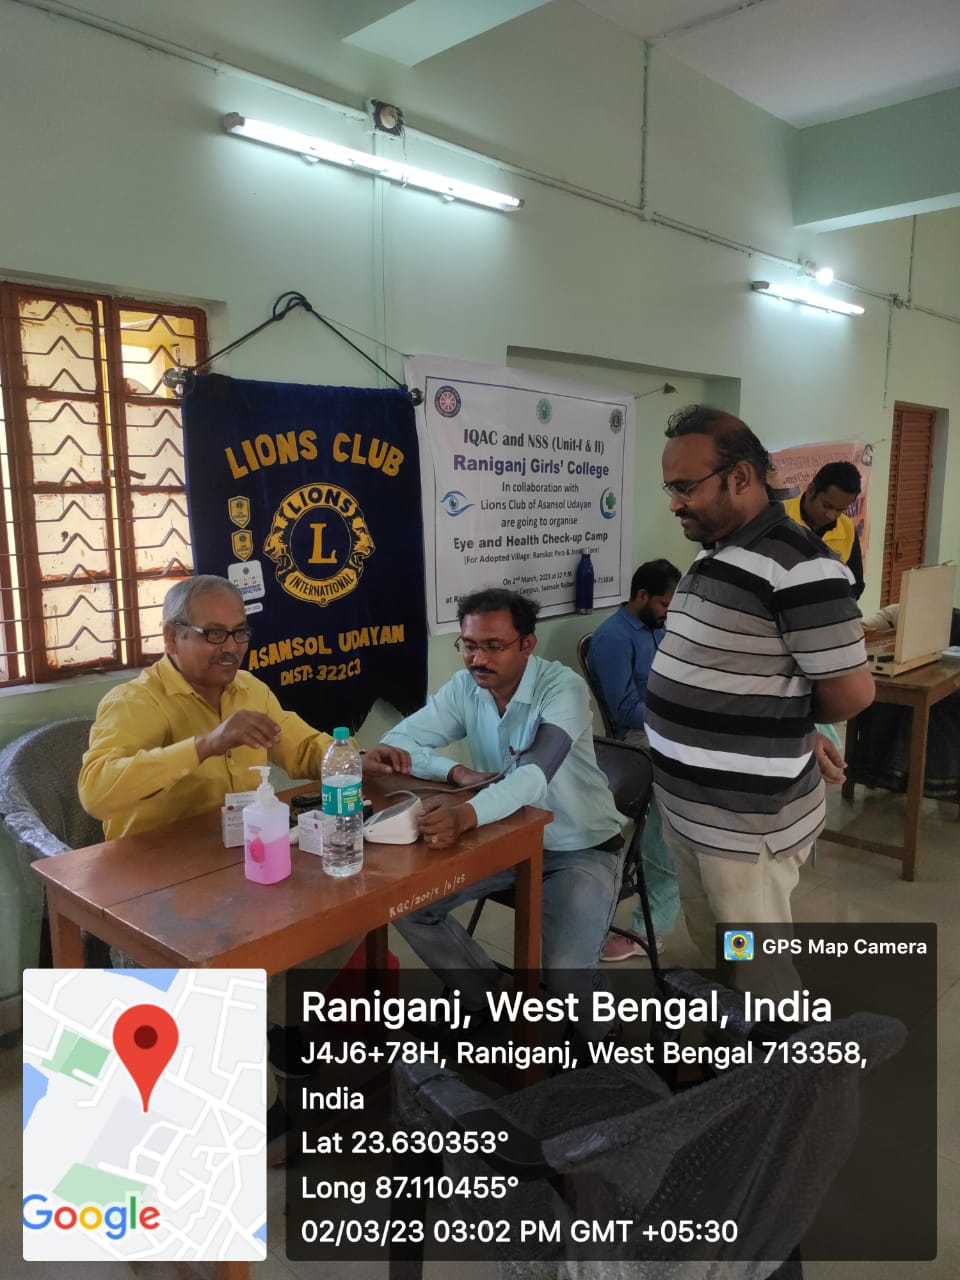 Health Check up camp organised by IQAC and NSS Unit I & II Raniganj Girls' College